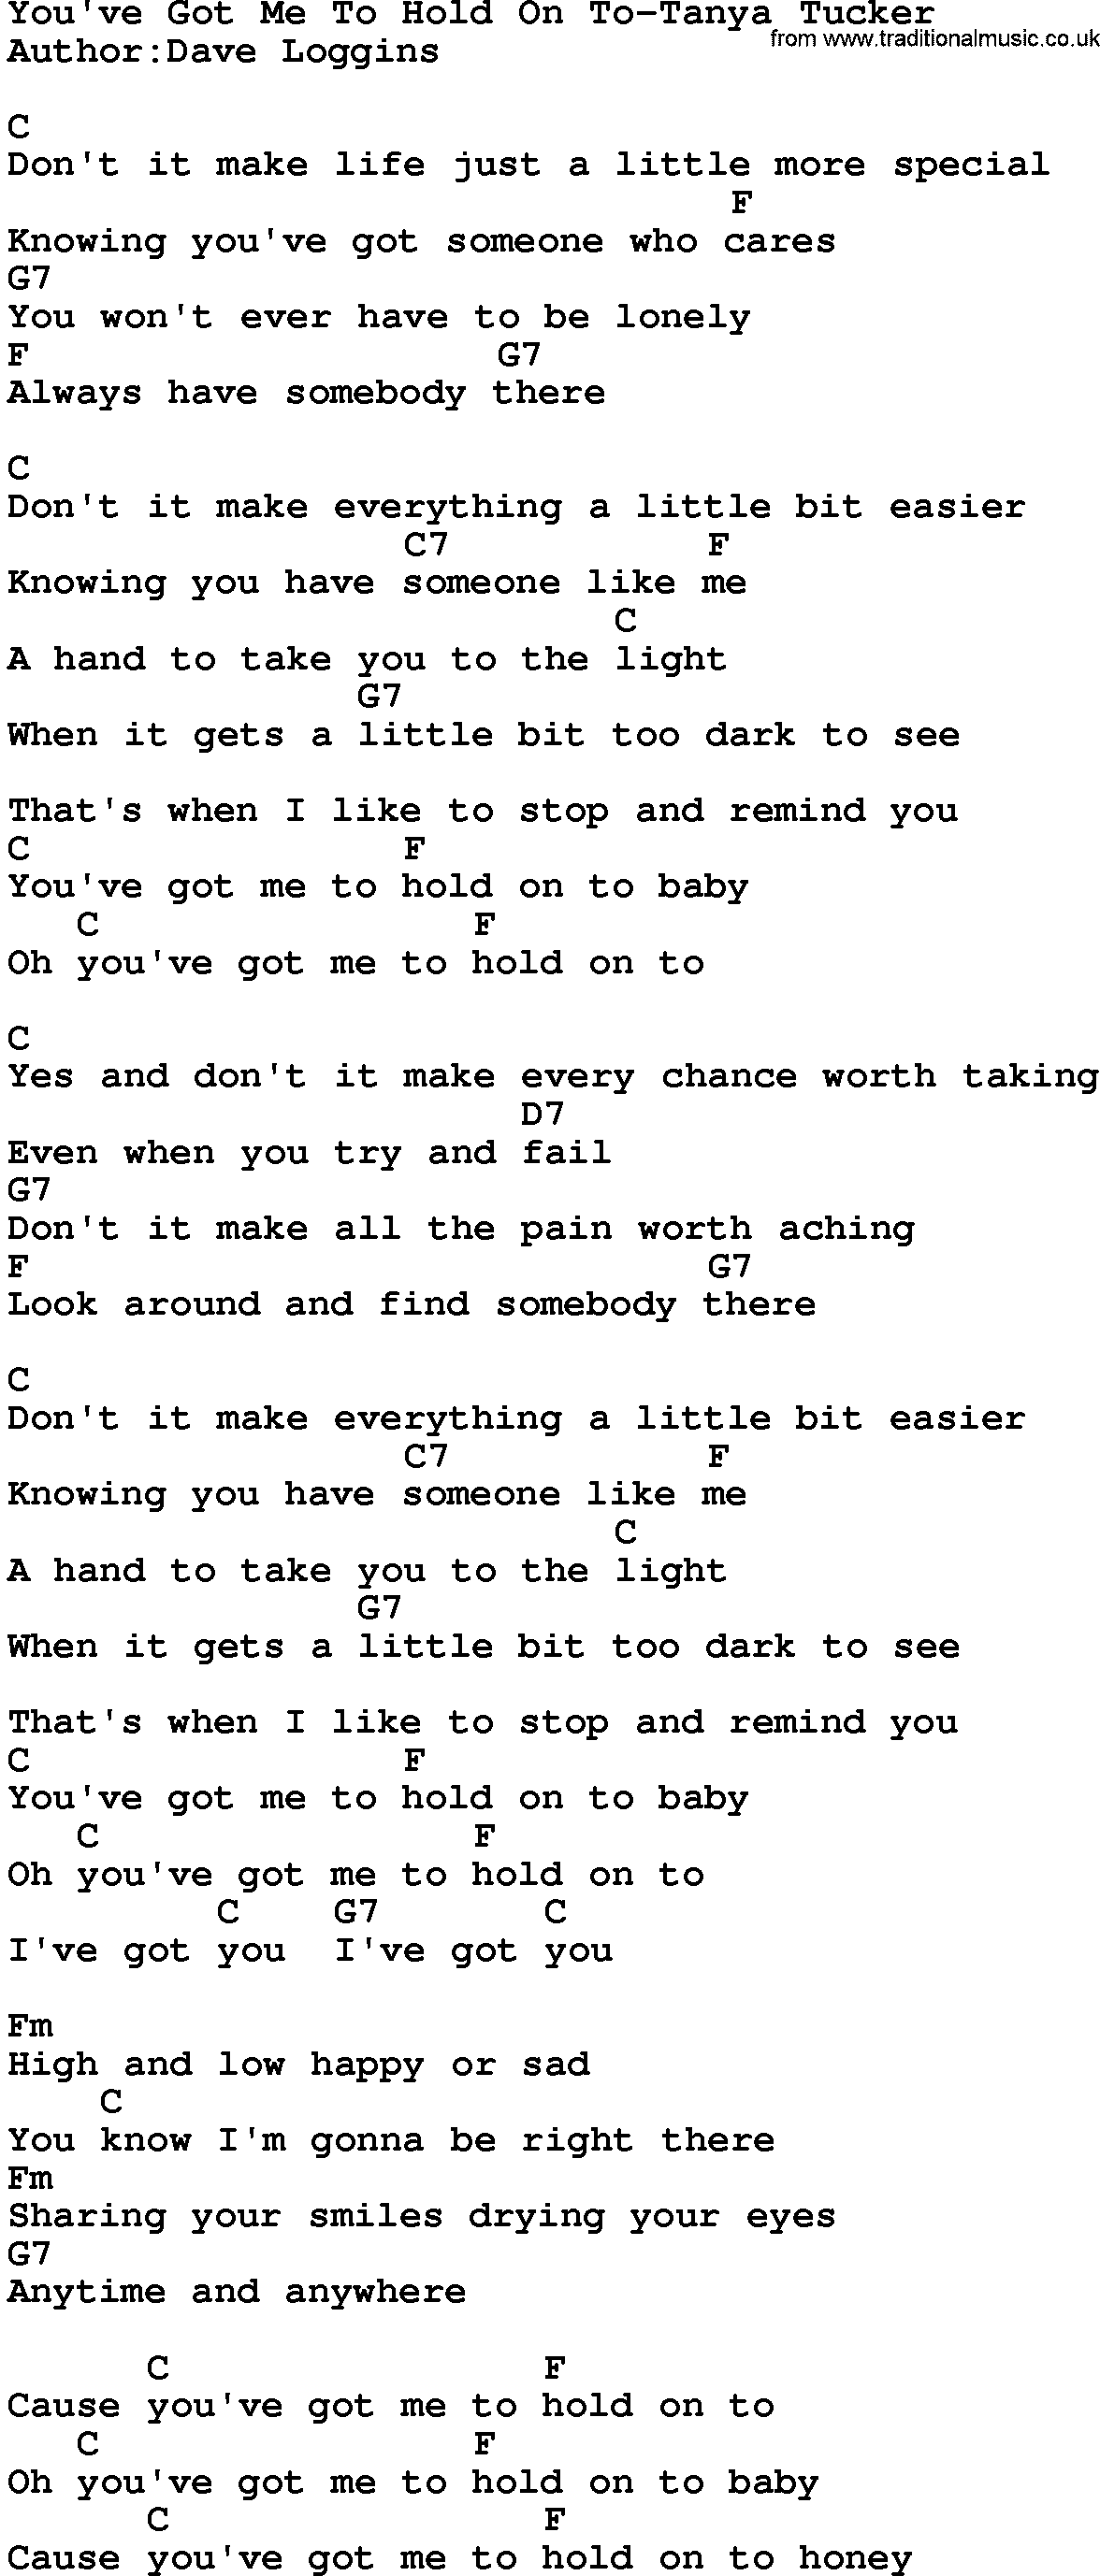 Country music song: You've Got Me To Hold On To-Tanya Tucker lyrics and chords